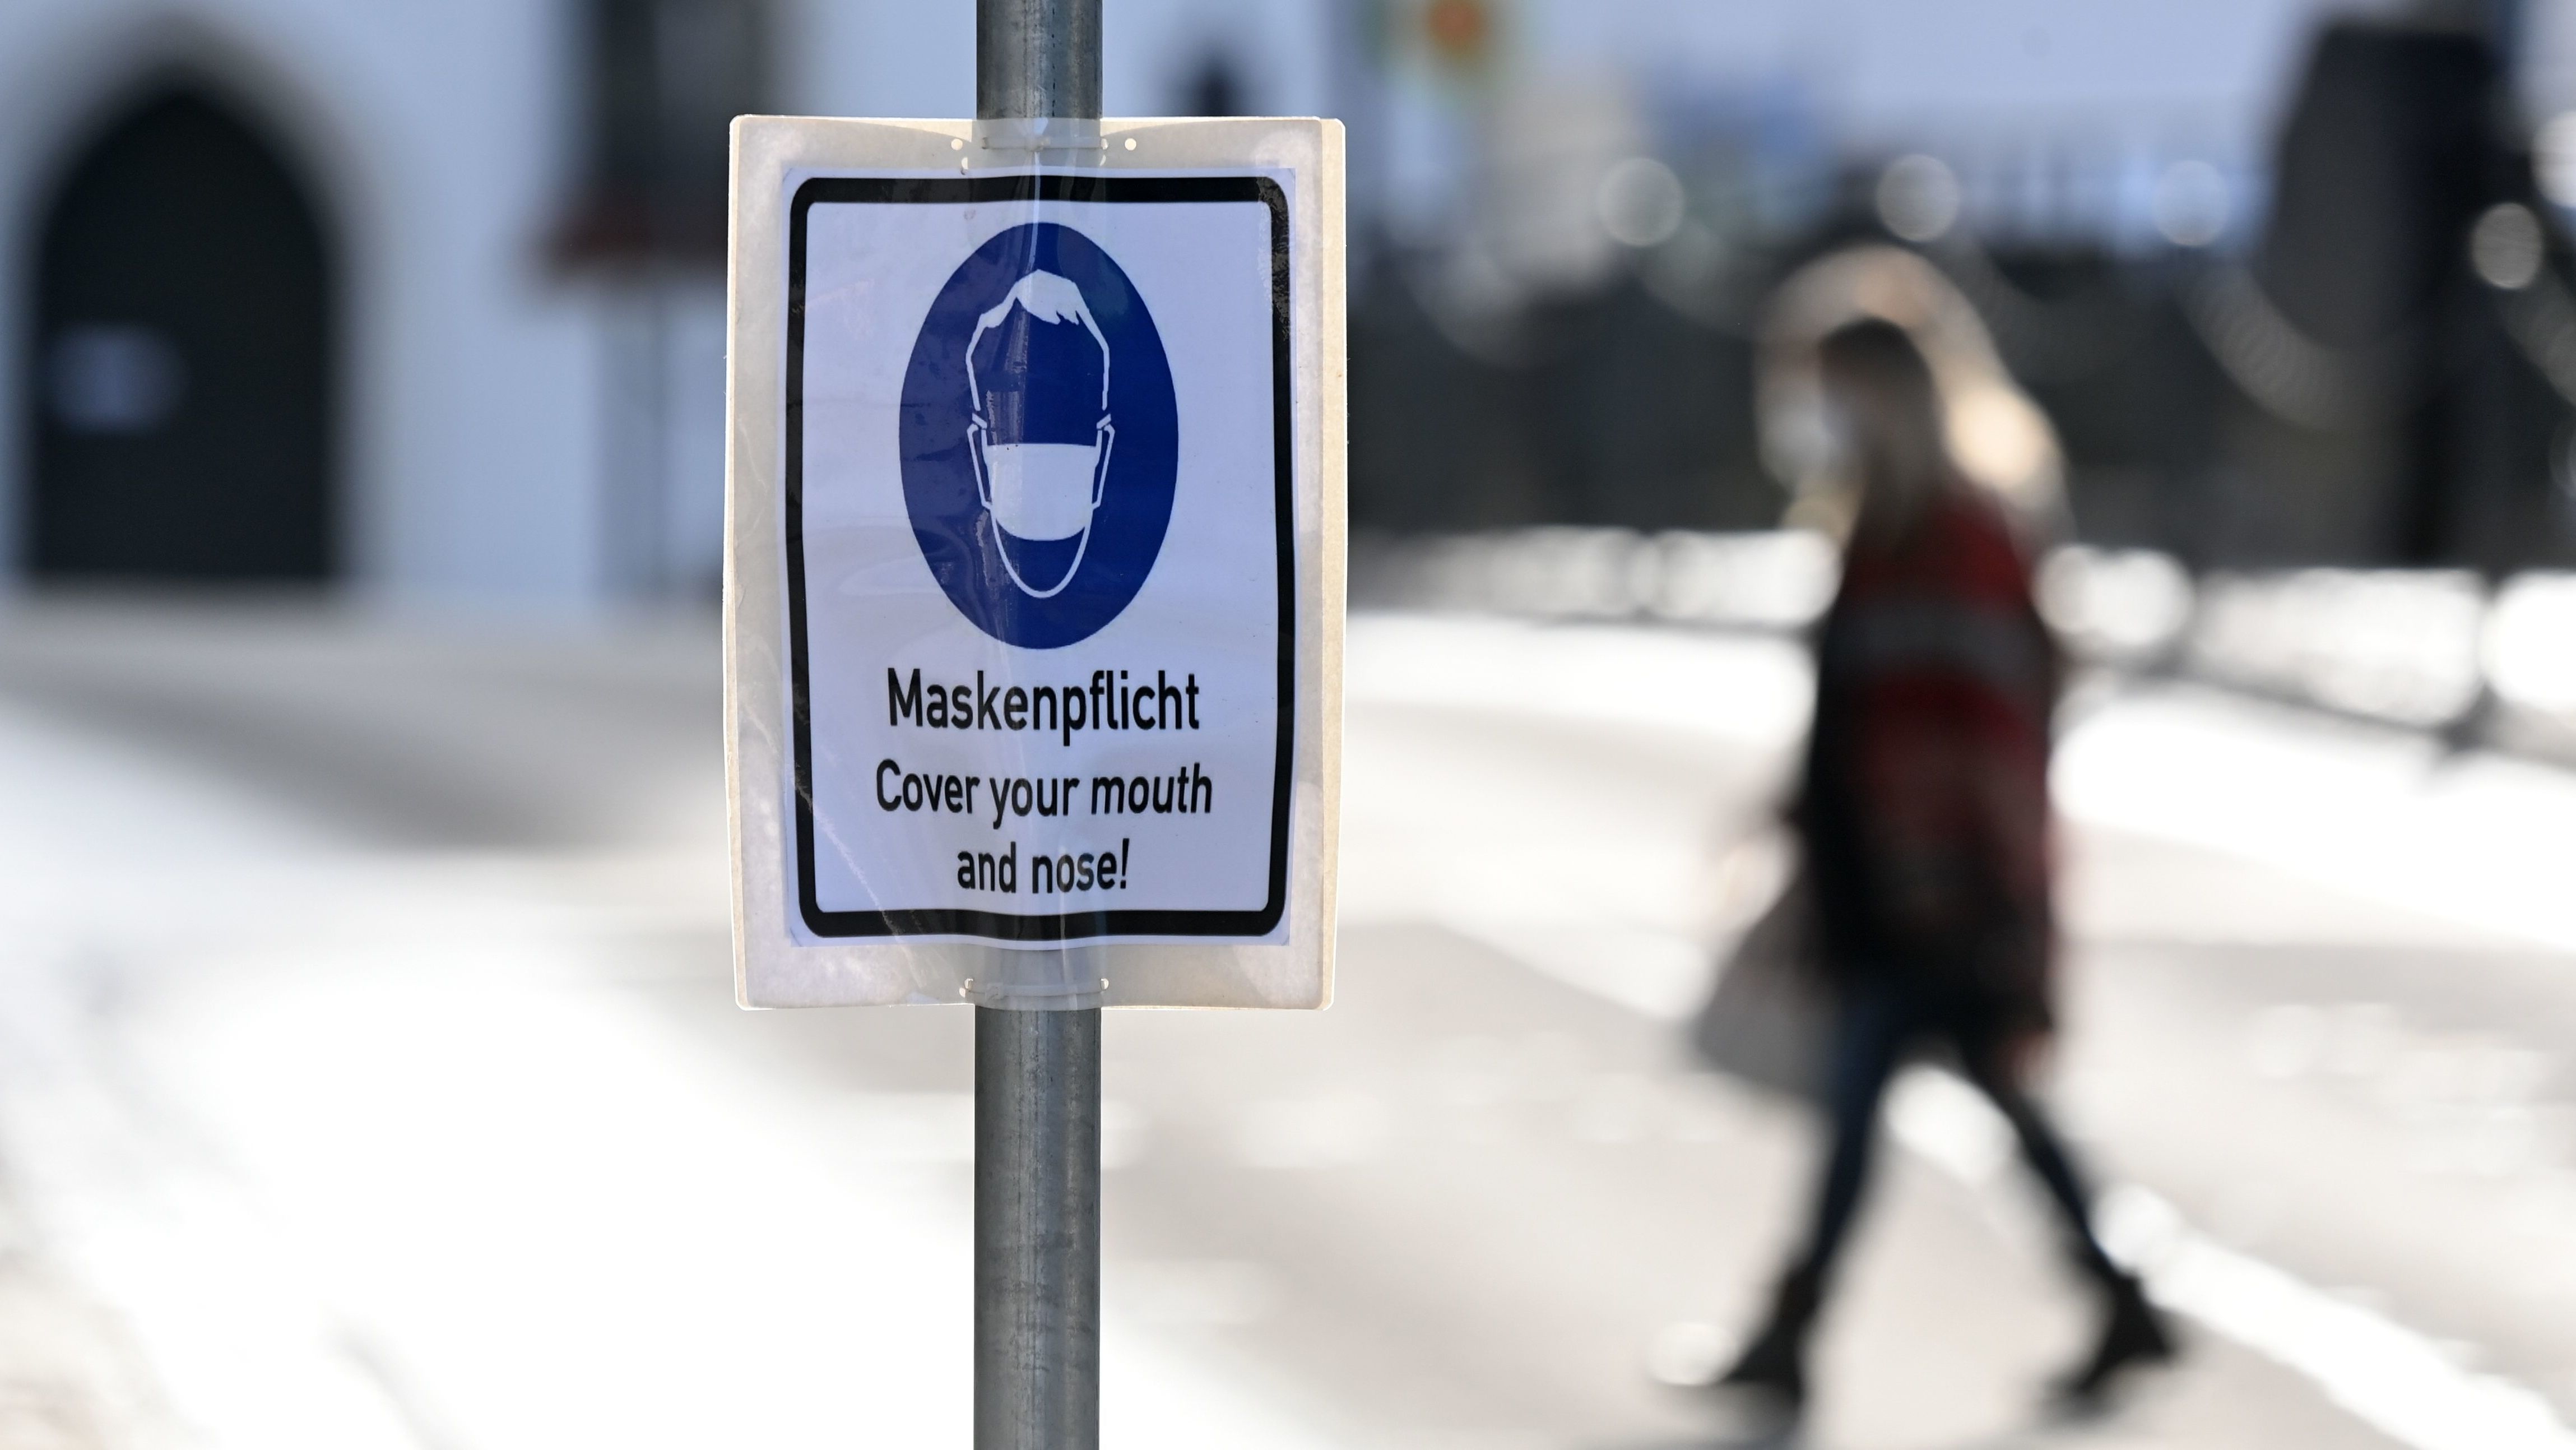 A sign mandating mask-wearing in the city of Fuerstenfeldbruck, southern Germany.